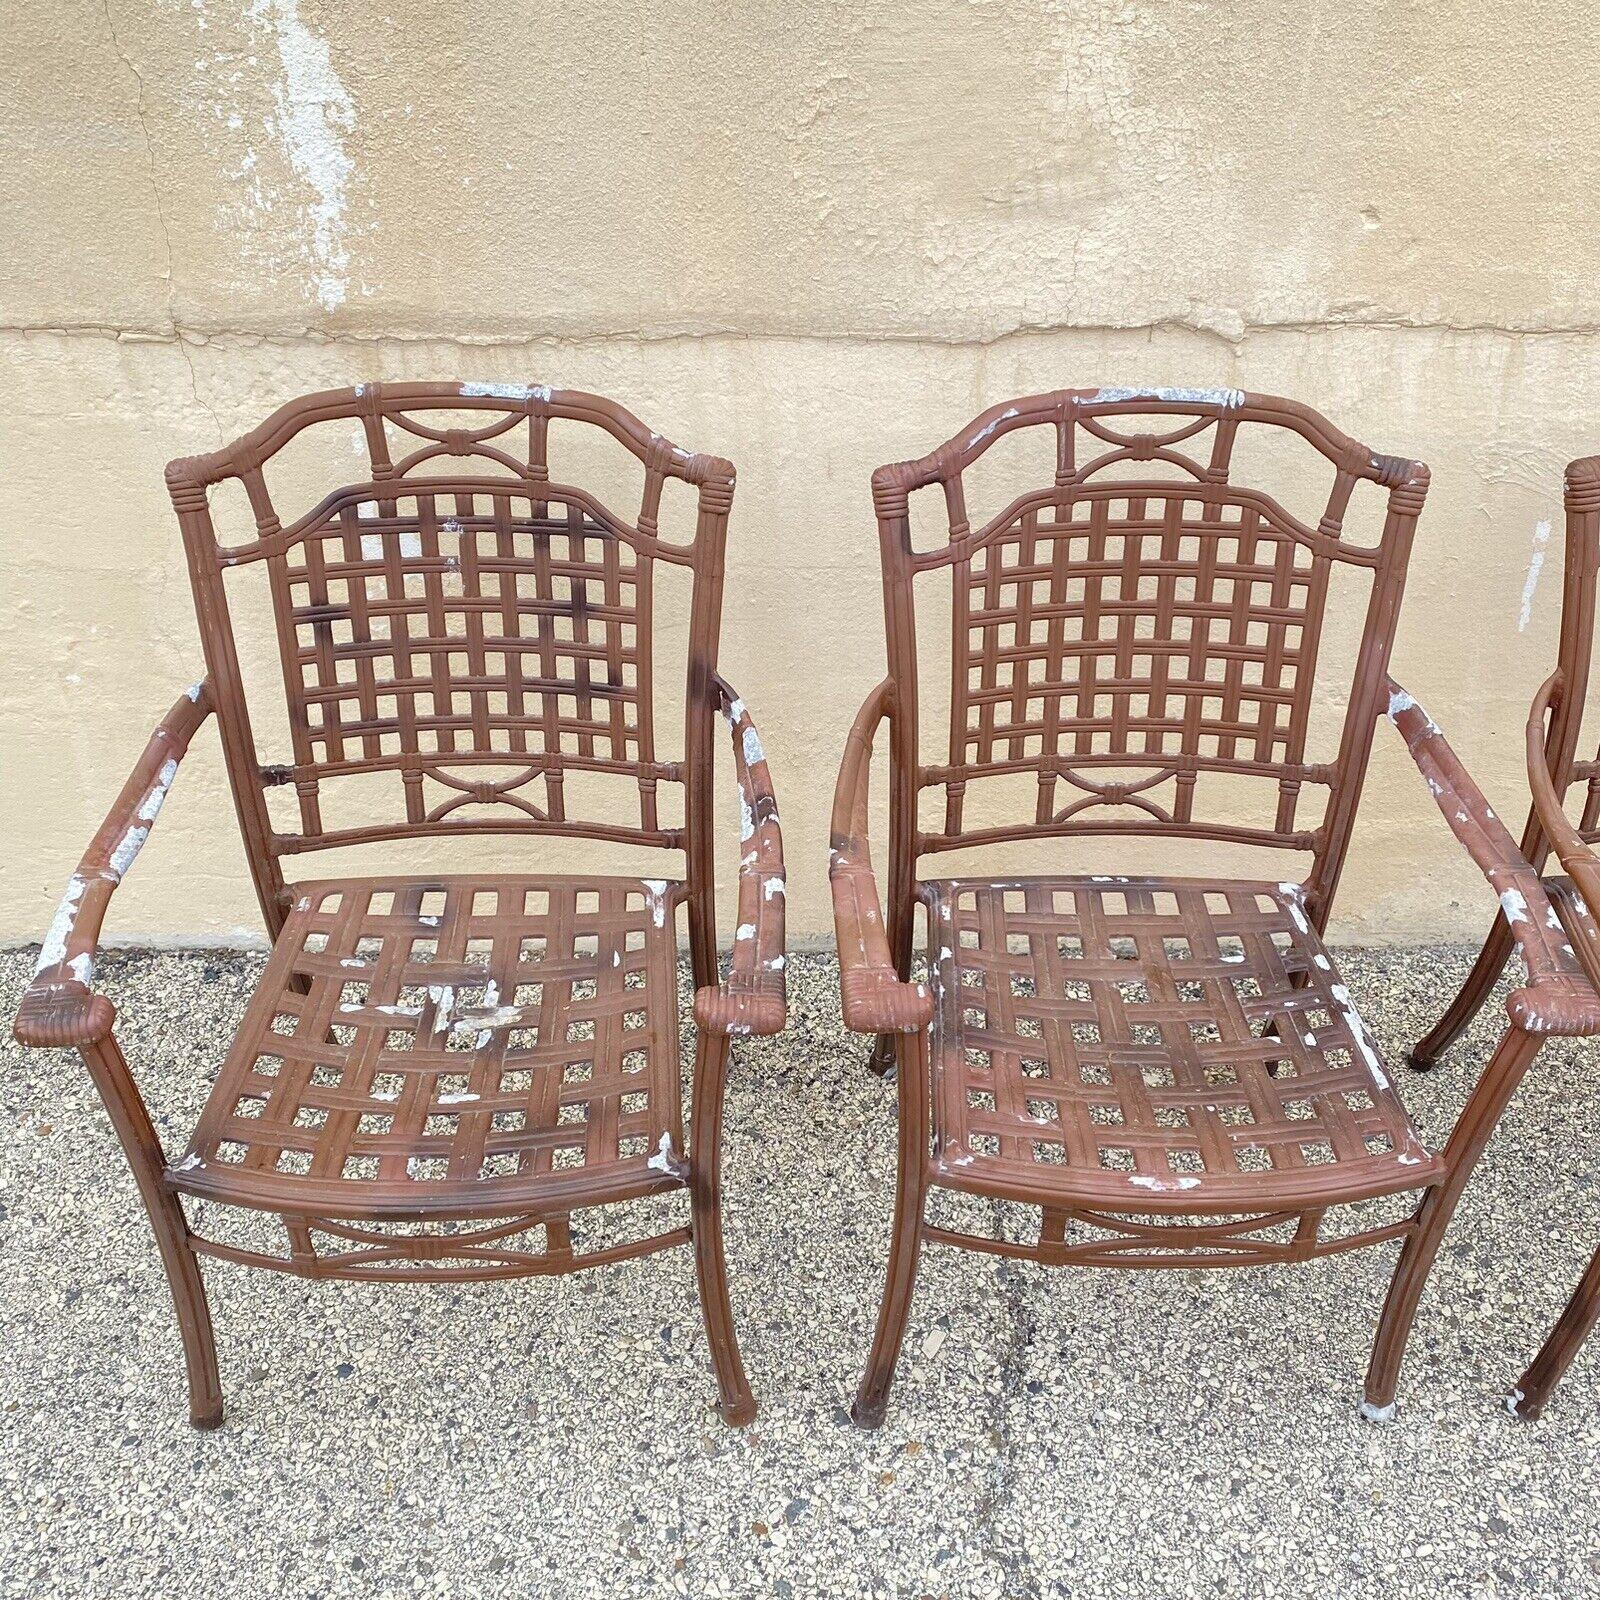 Cast Aluminum Basket Weave Lattice Rattan Patio Outdoor Arm Chairs - Set of 4 In Good Condition For Sale In Philadelphia, PA